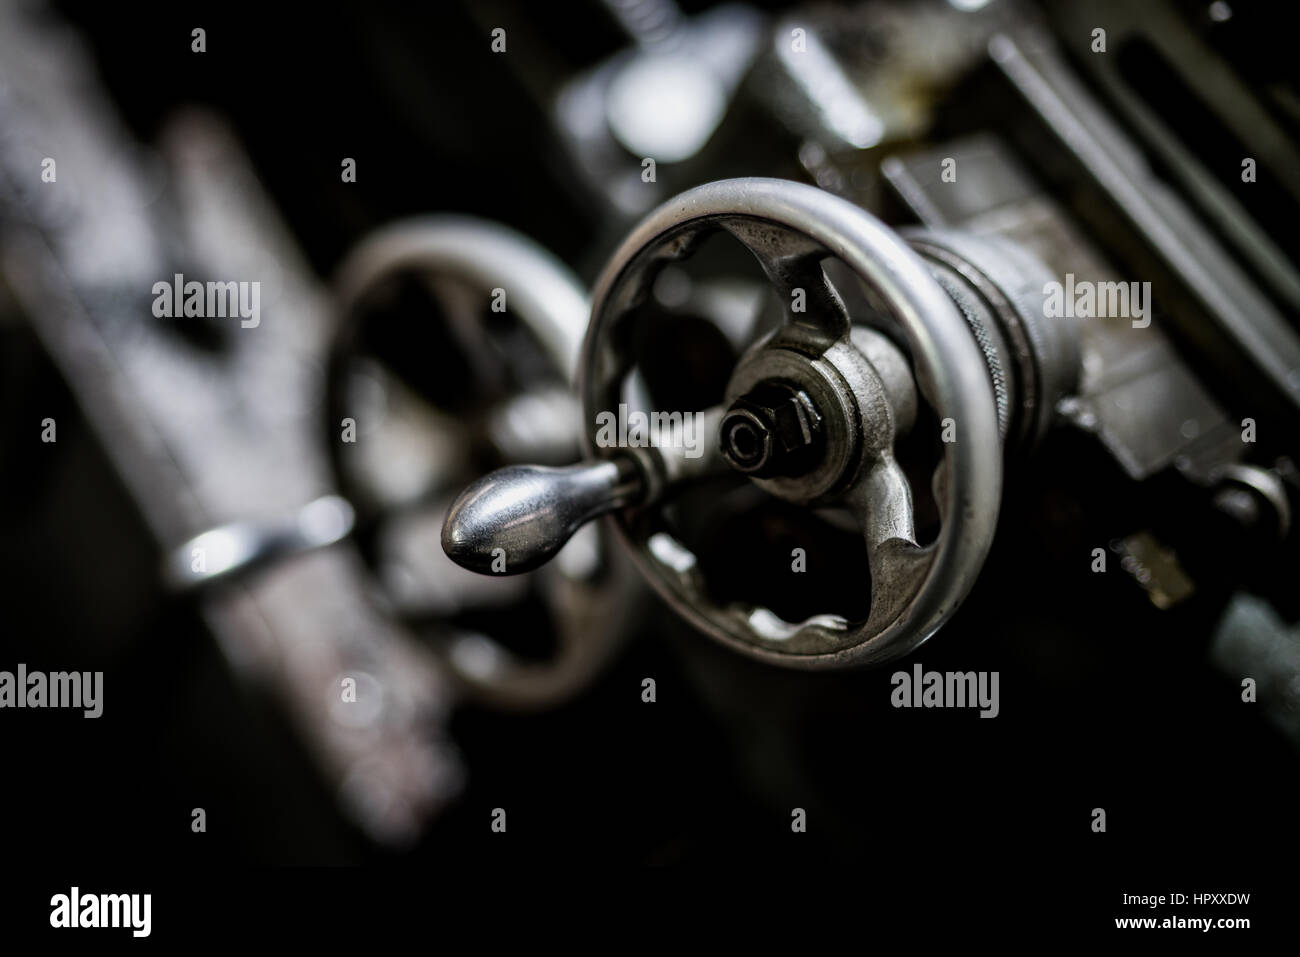 A blurred close up of metal wheels and cogs in machinery. Stock Photo